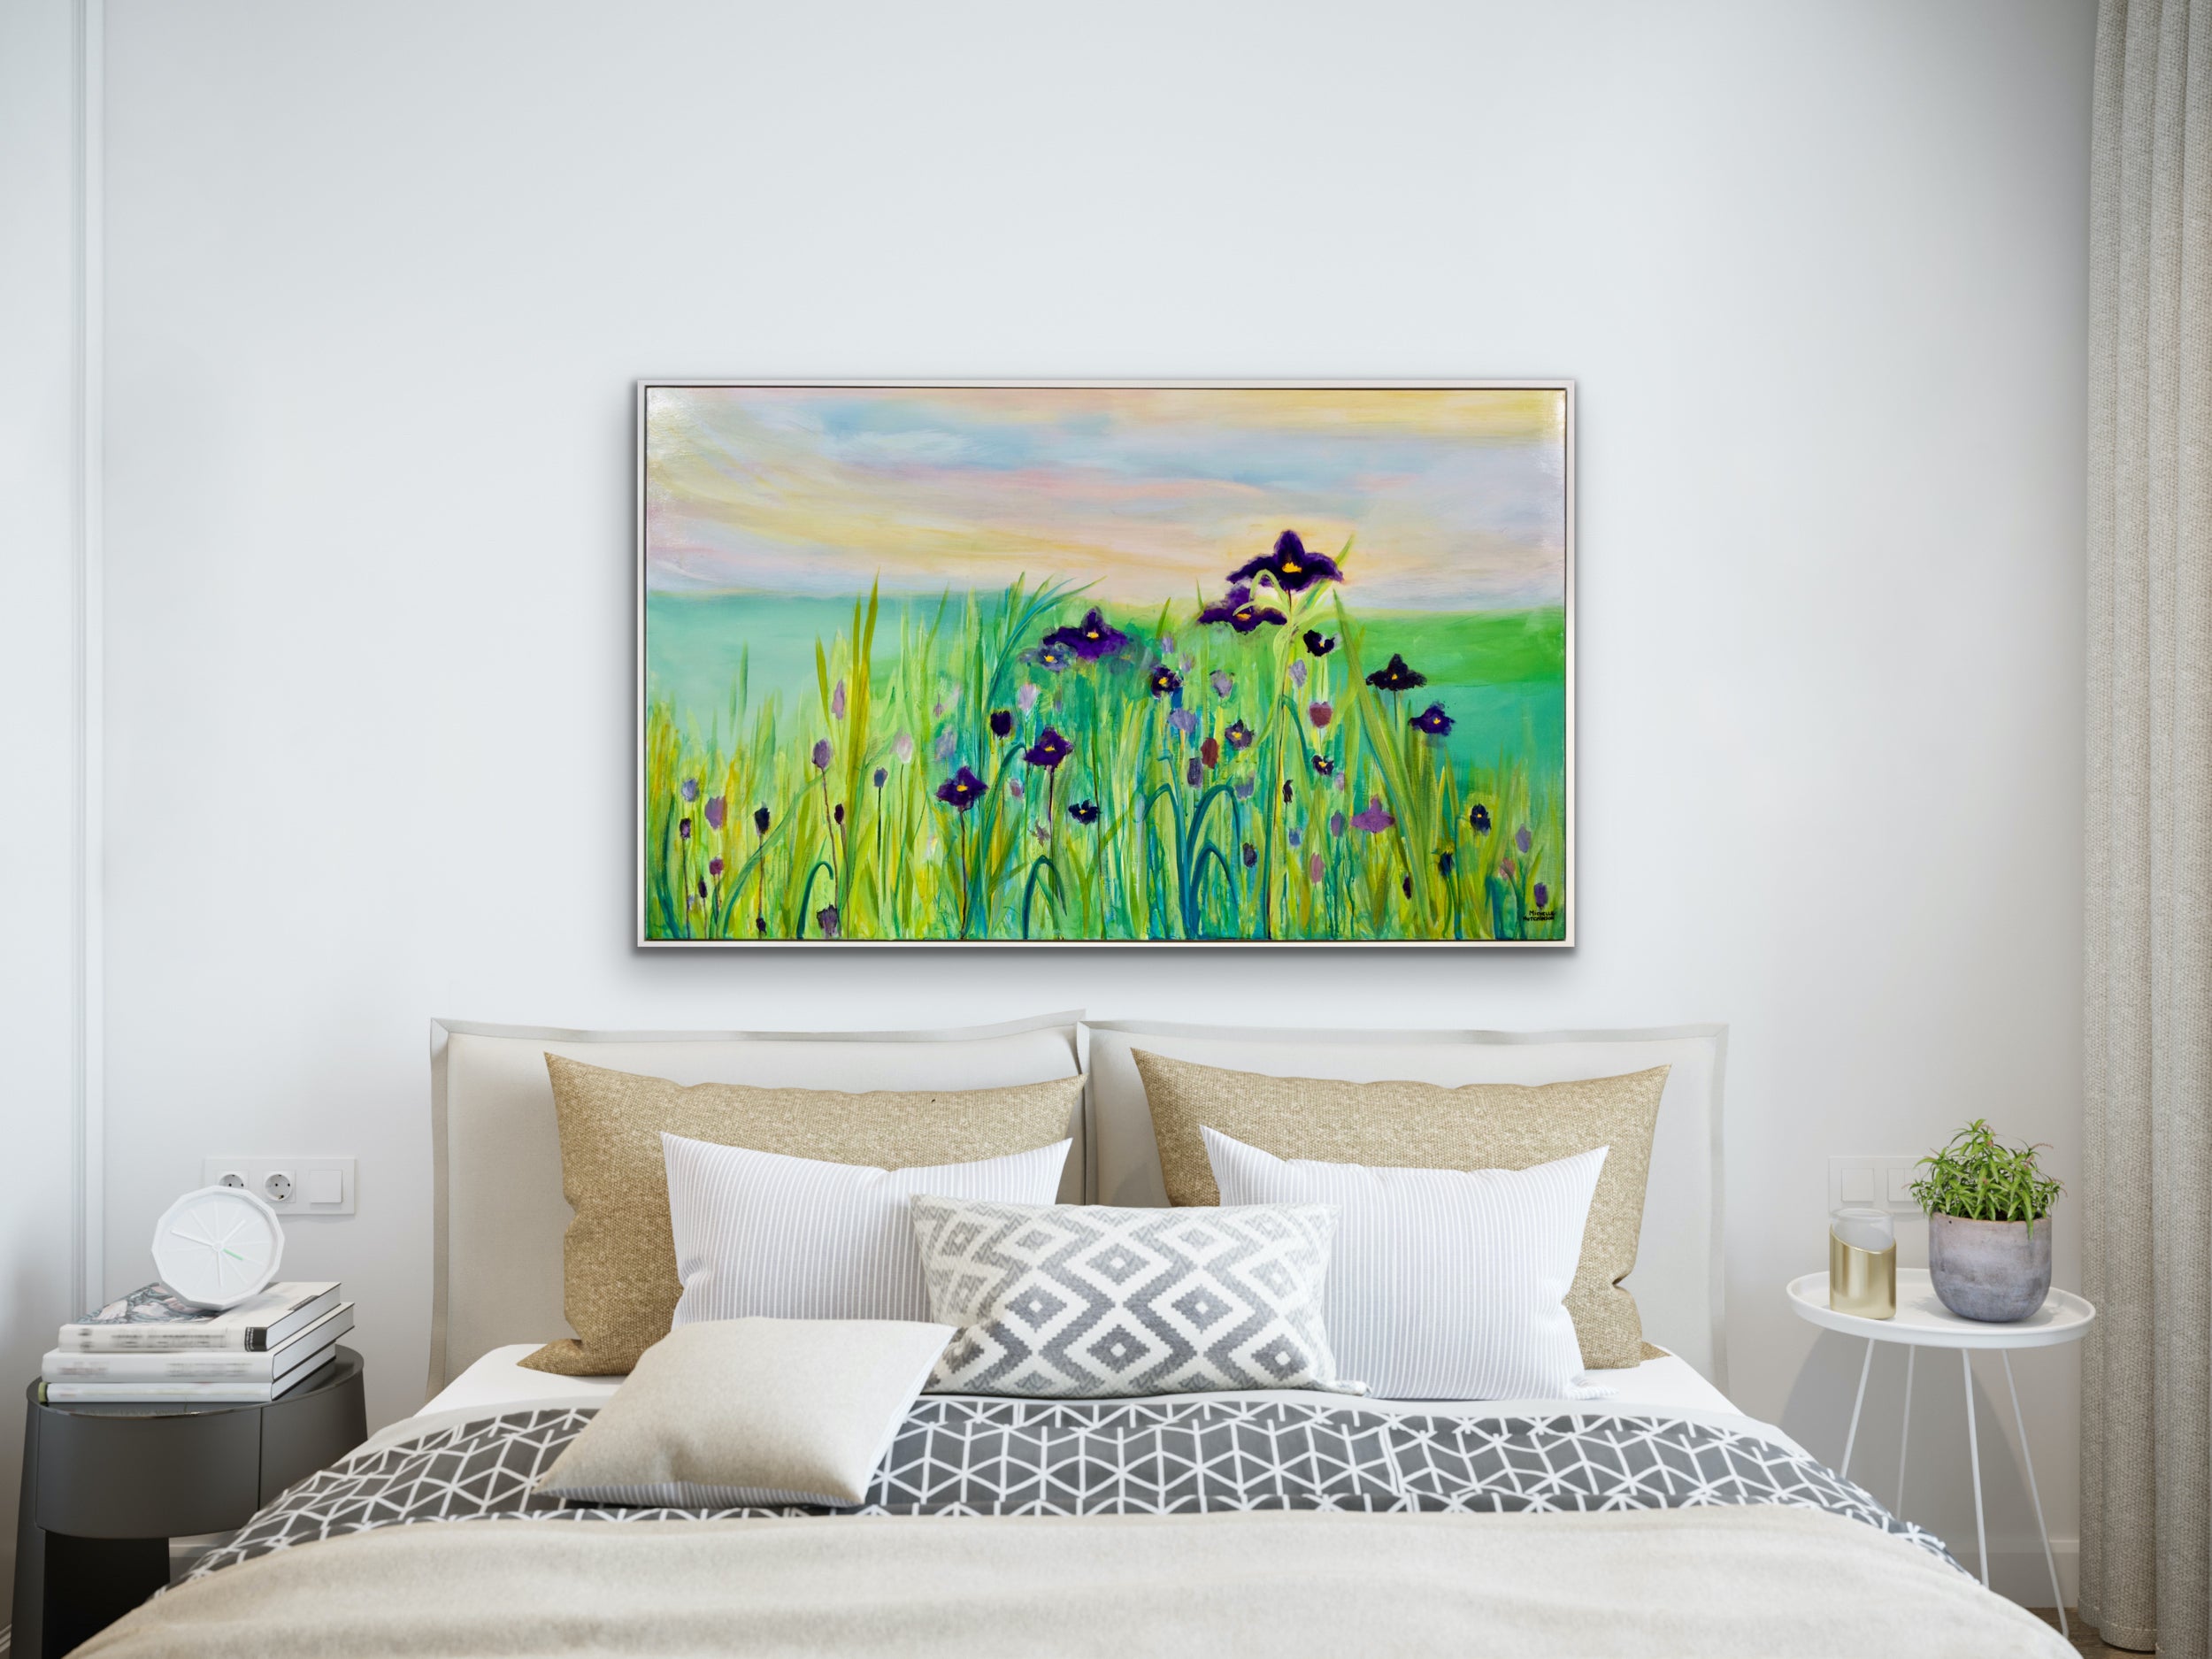 Purple irises with teal water and pretty sky displayed above a bed with neutral furnishings